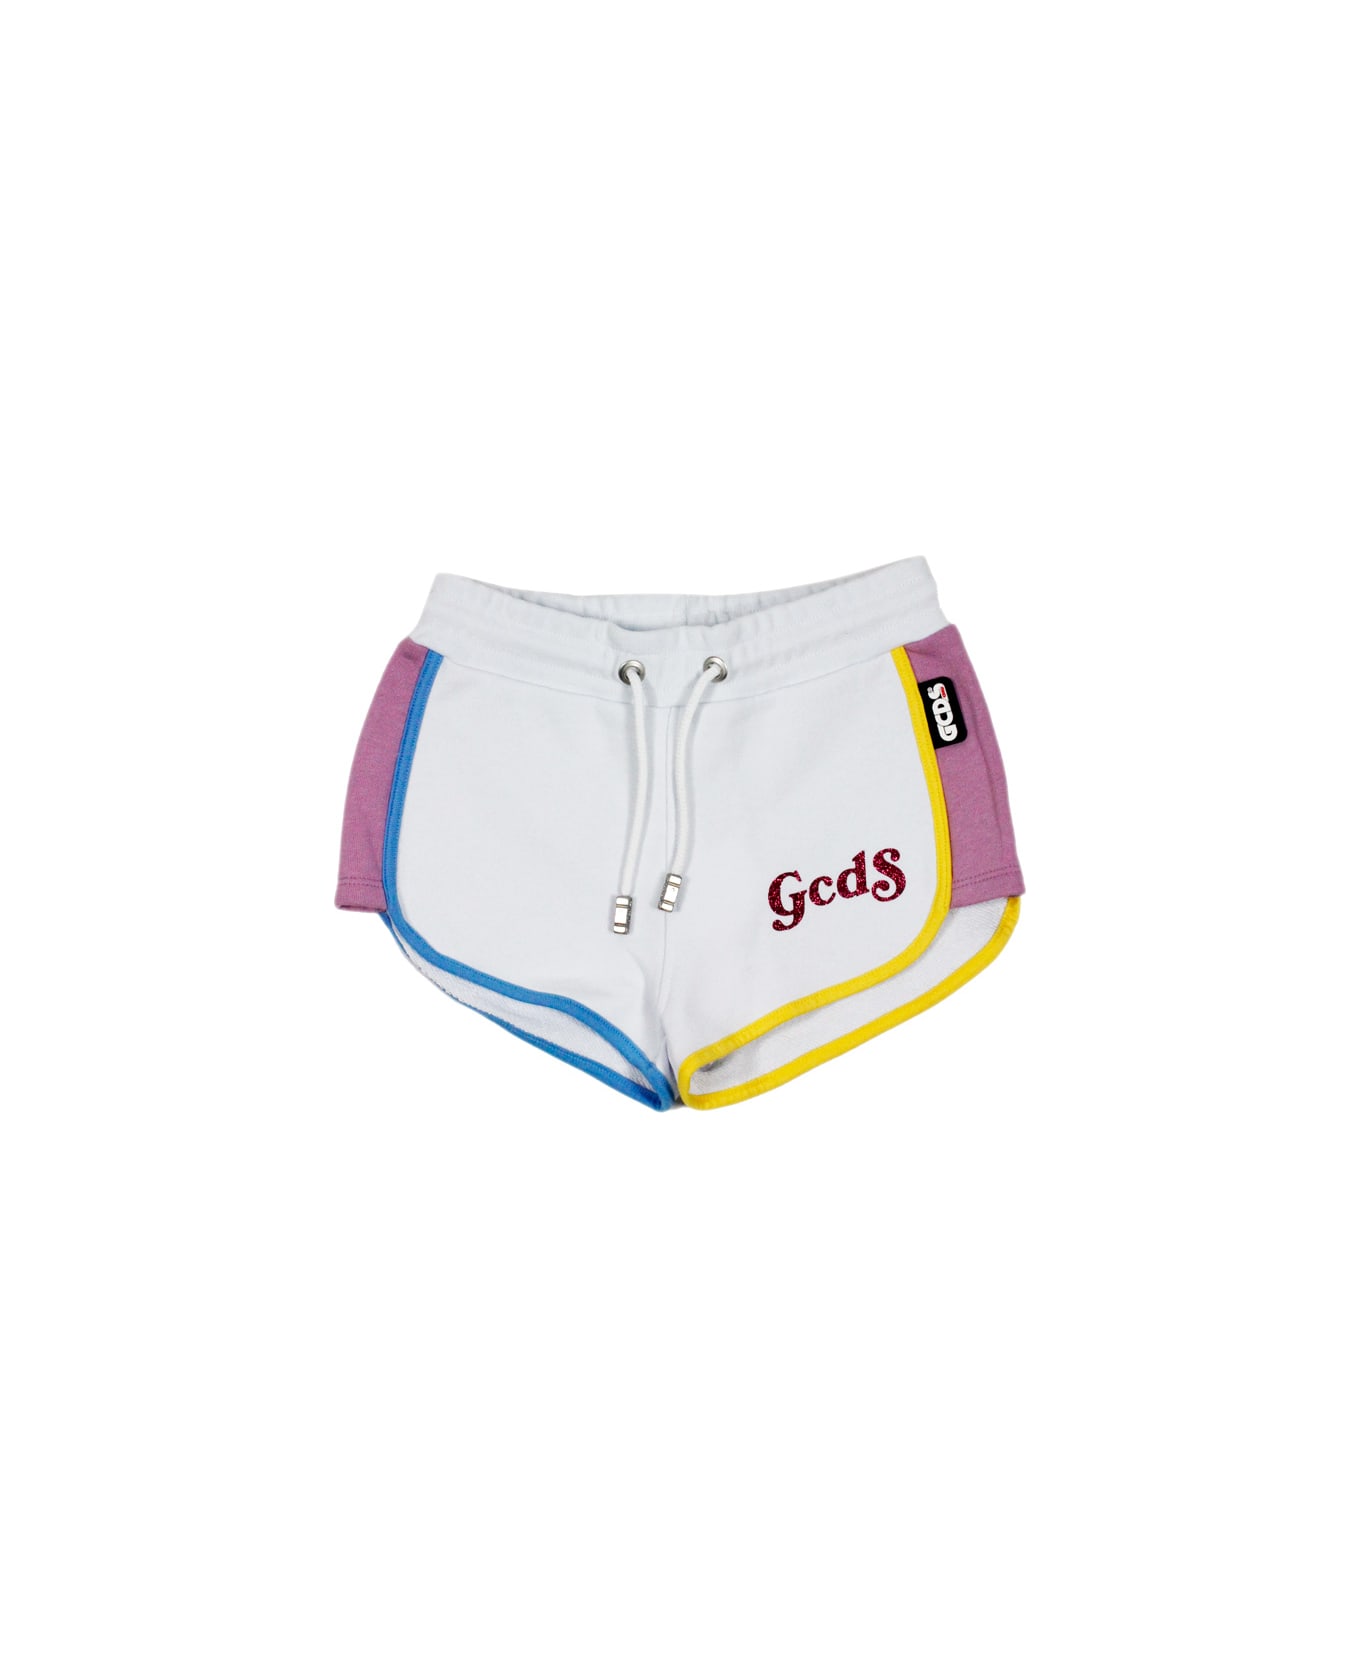 GCDS Cotton Fleece Shorts With Drawstring And Lurex Lettering - White